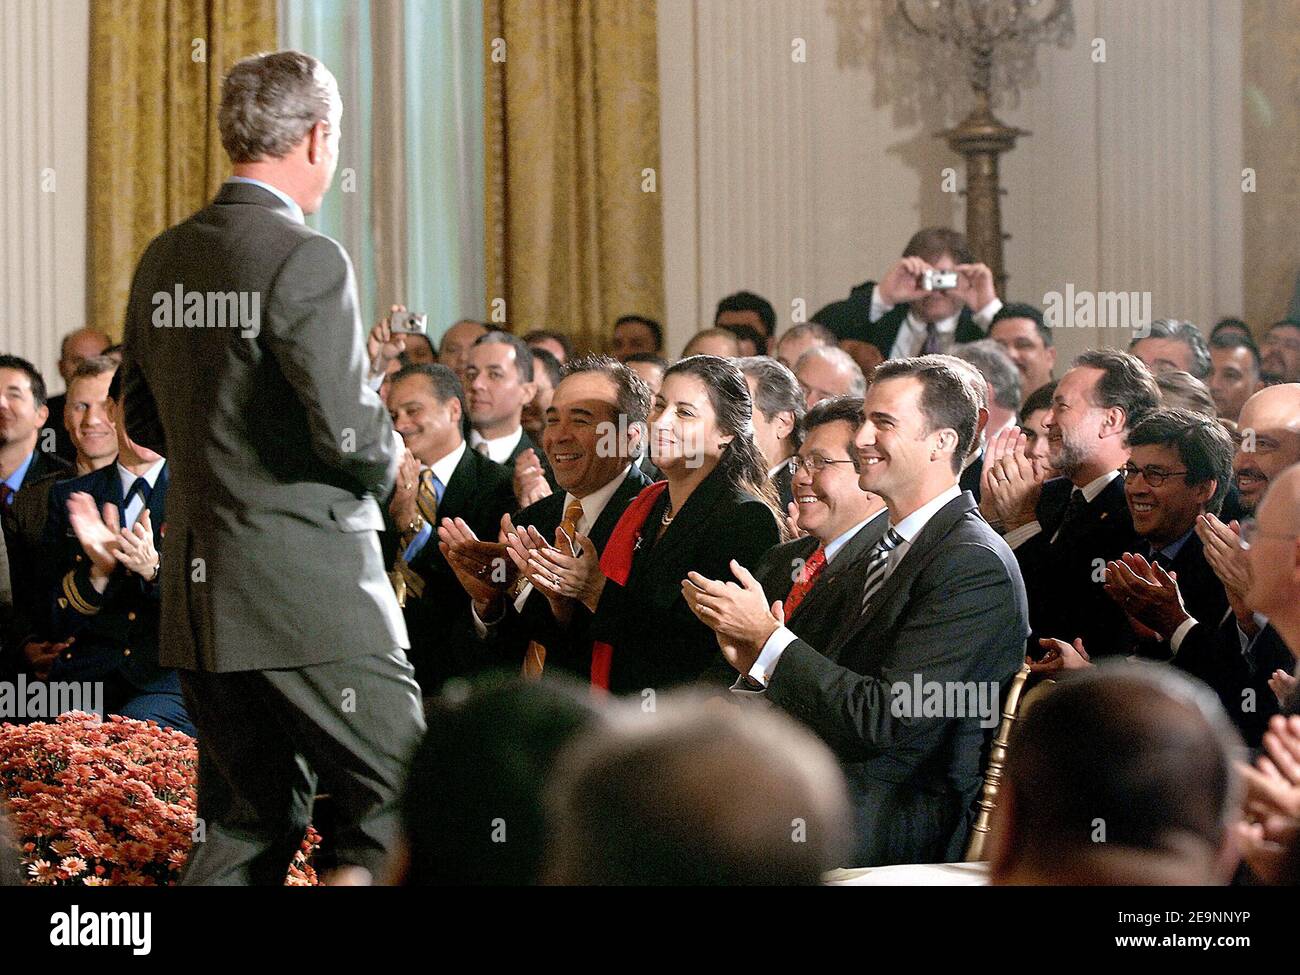 Crown Prince Felipe of Spain , Attorney General Alberto Gonzales(L) and President George W. Bush(R) attend a White House ceremony celebrating the Hispanic Heritage Month. in the East Room, Washington DC, USA, on October 06, 2006. Photo by Olivier Douliery/ABACAPRESS.COM Stock Photo